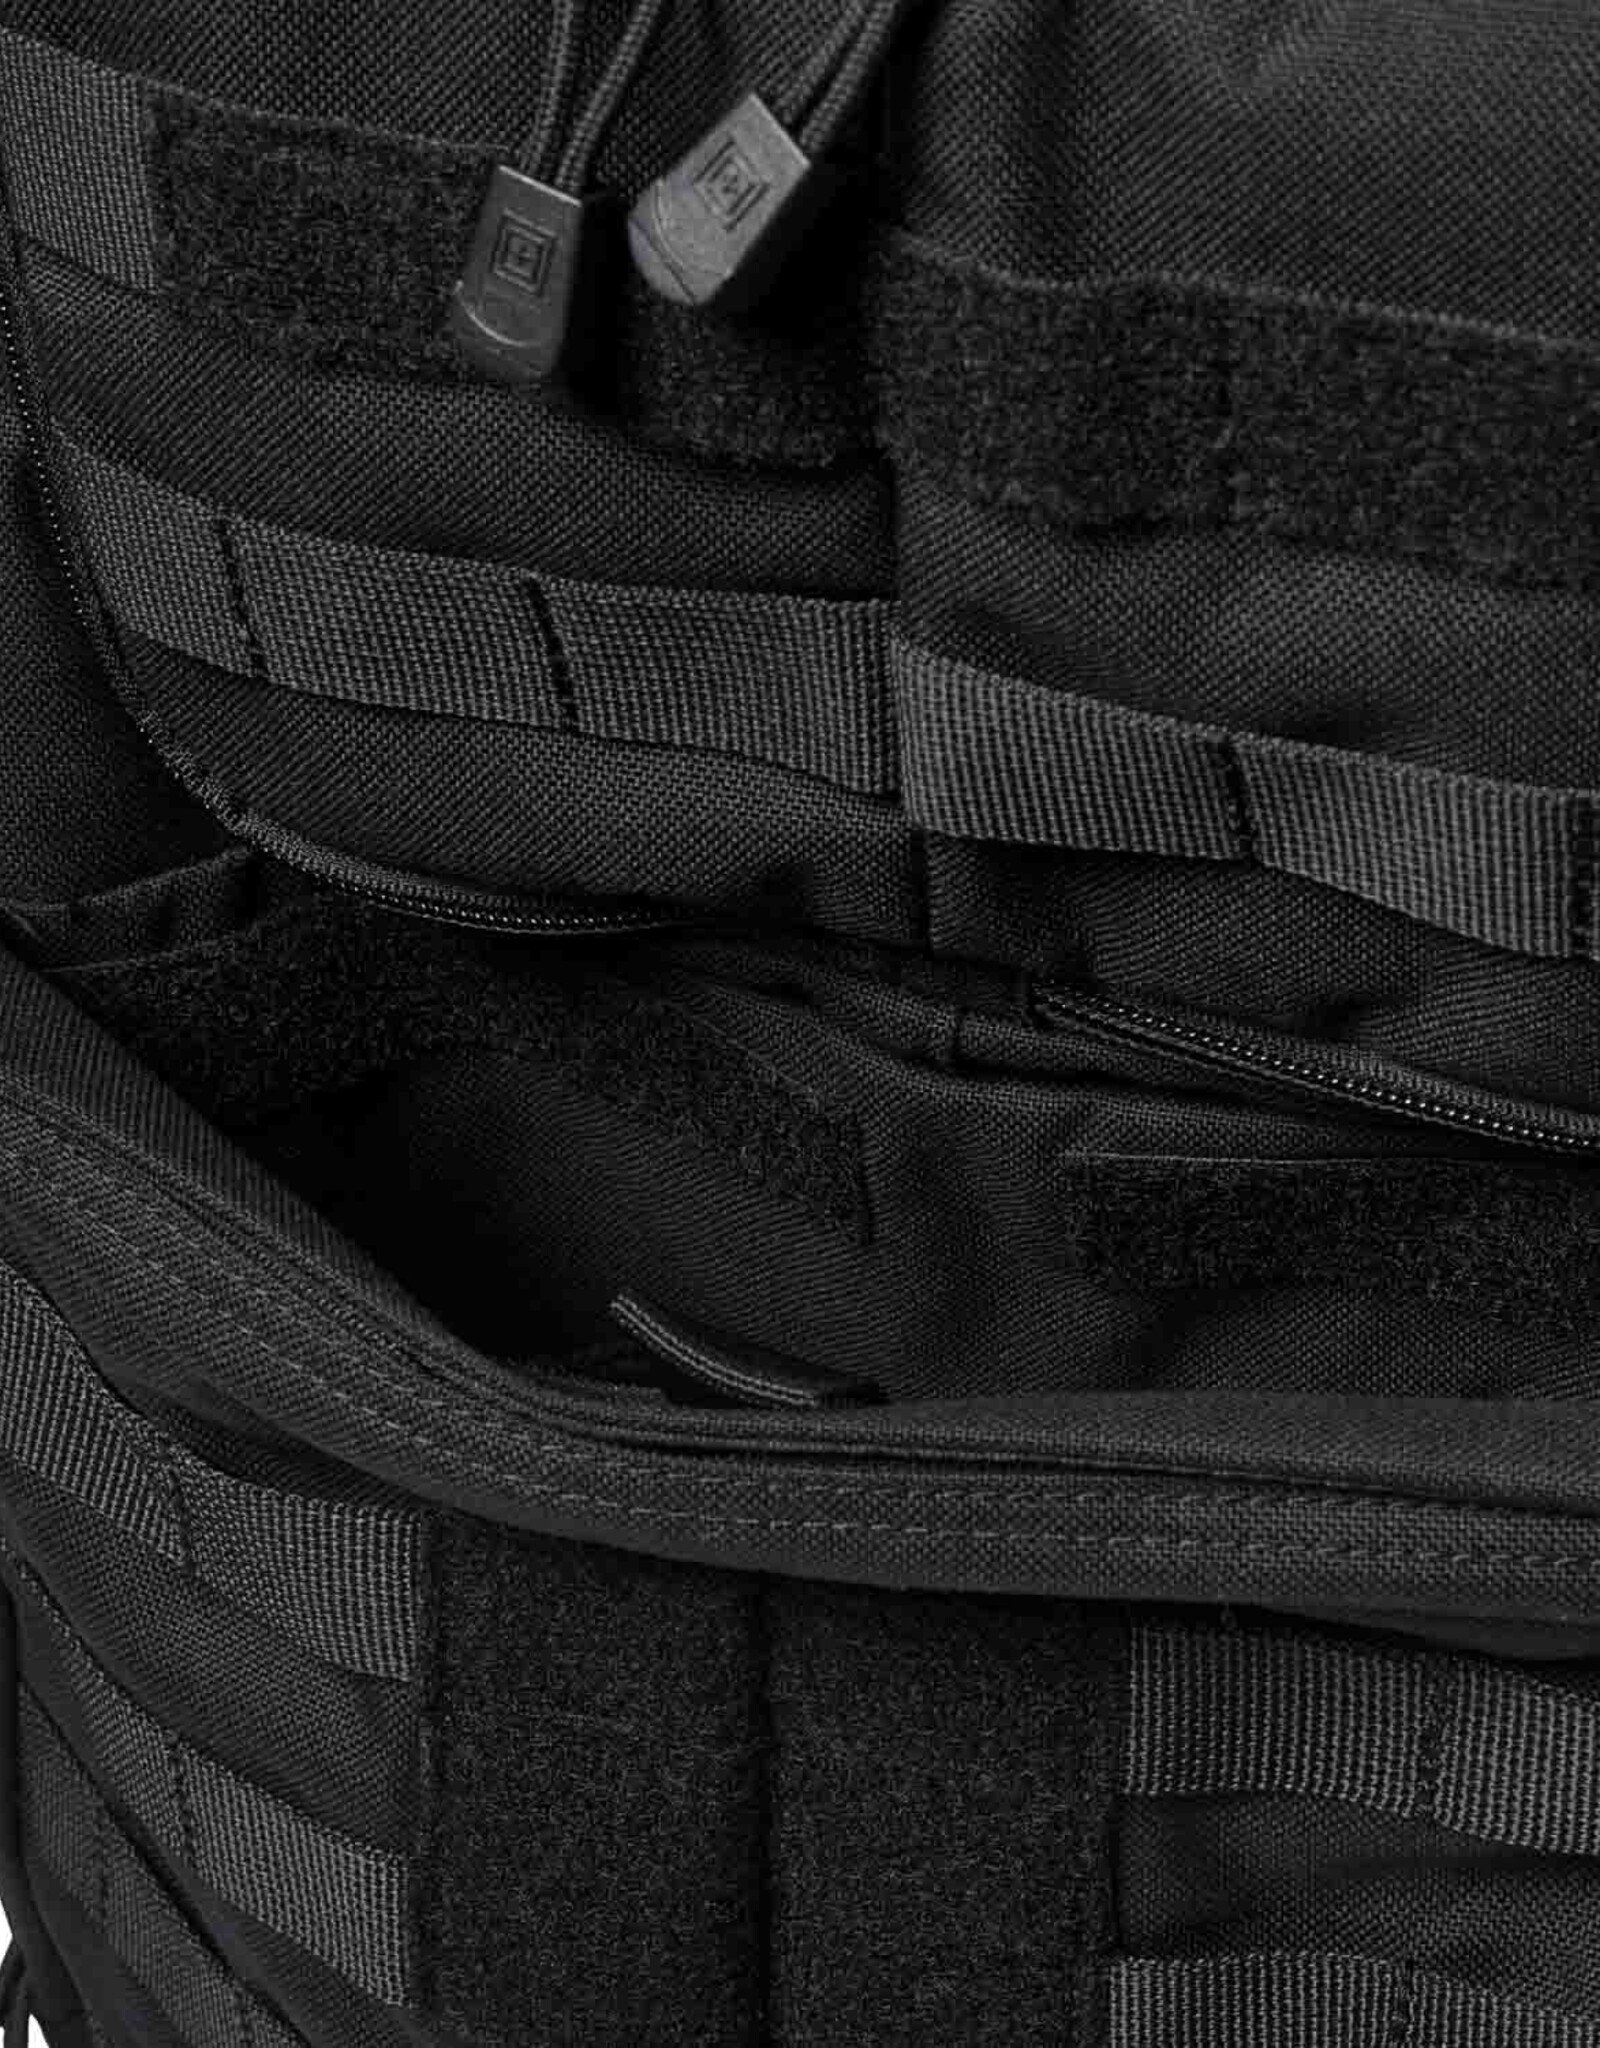 5.11 Tactical Rush 24 2.0 Backpack